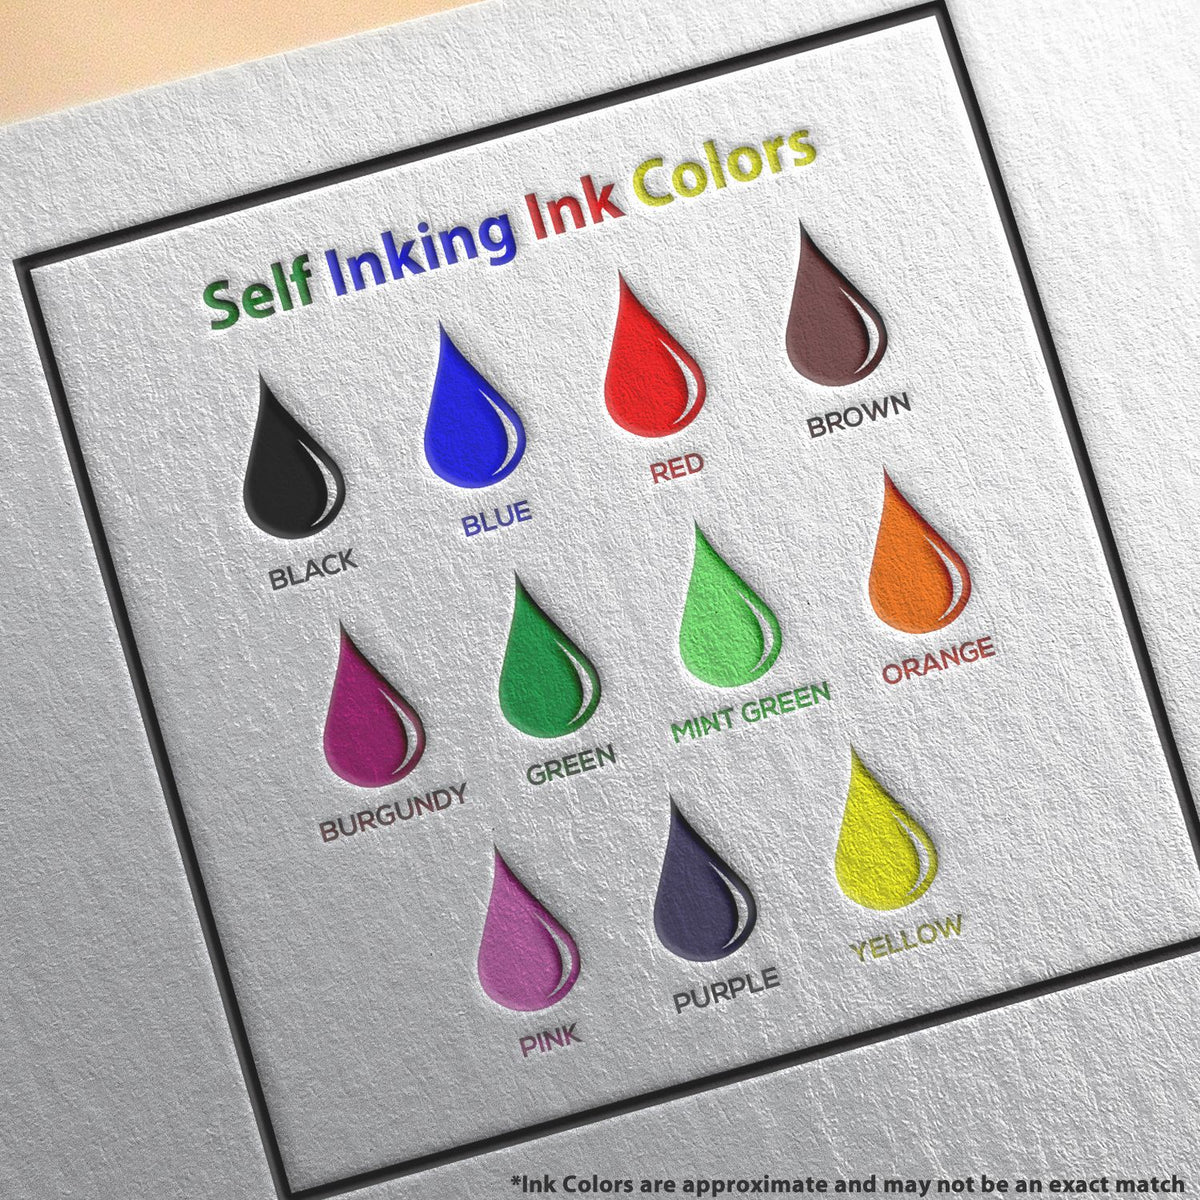 A picture showing the different ink colors or hues available for the Self-Inking Vermont PE Stamp product.